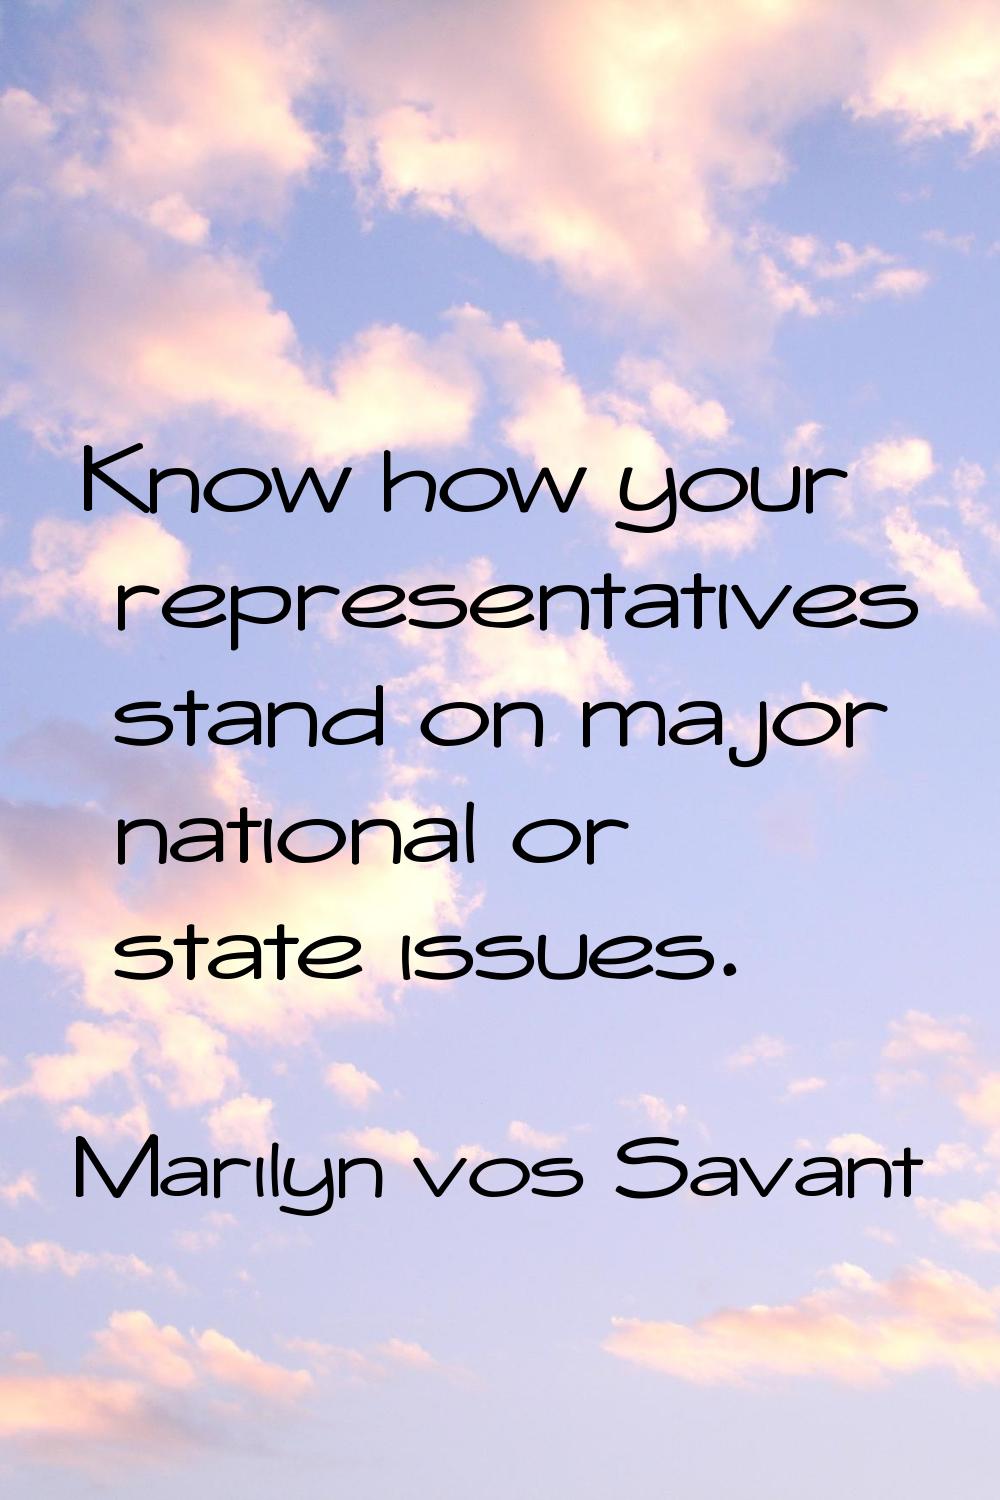 Know how your representatives stand on major national or state issues.